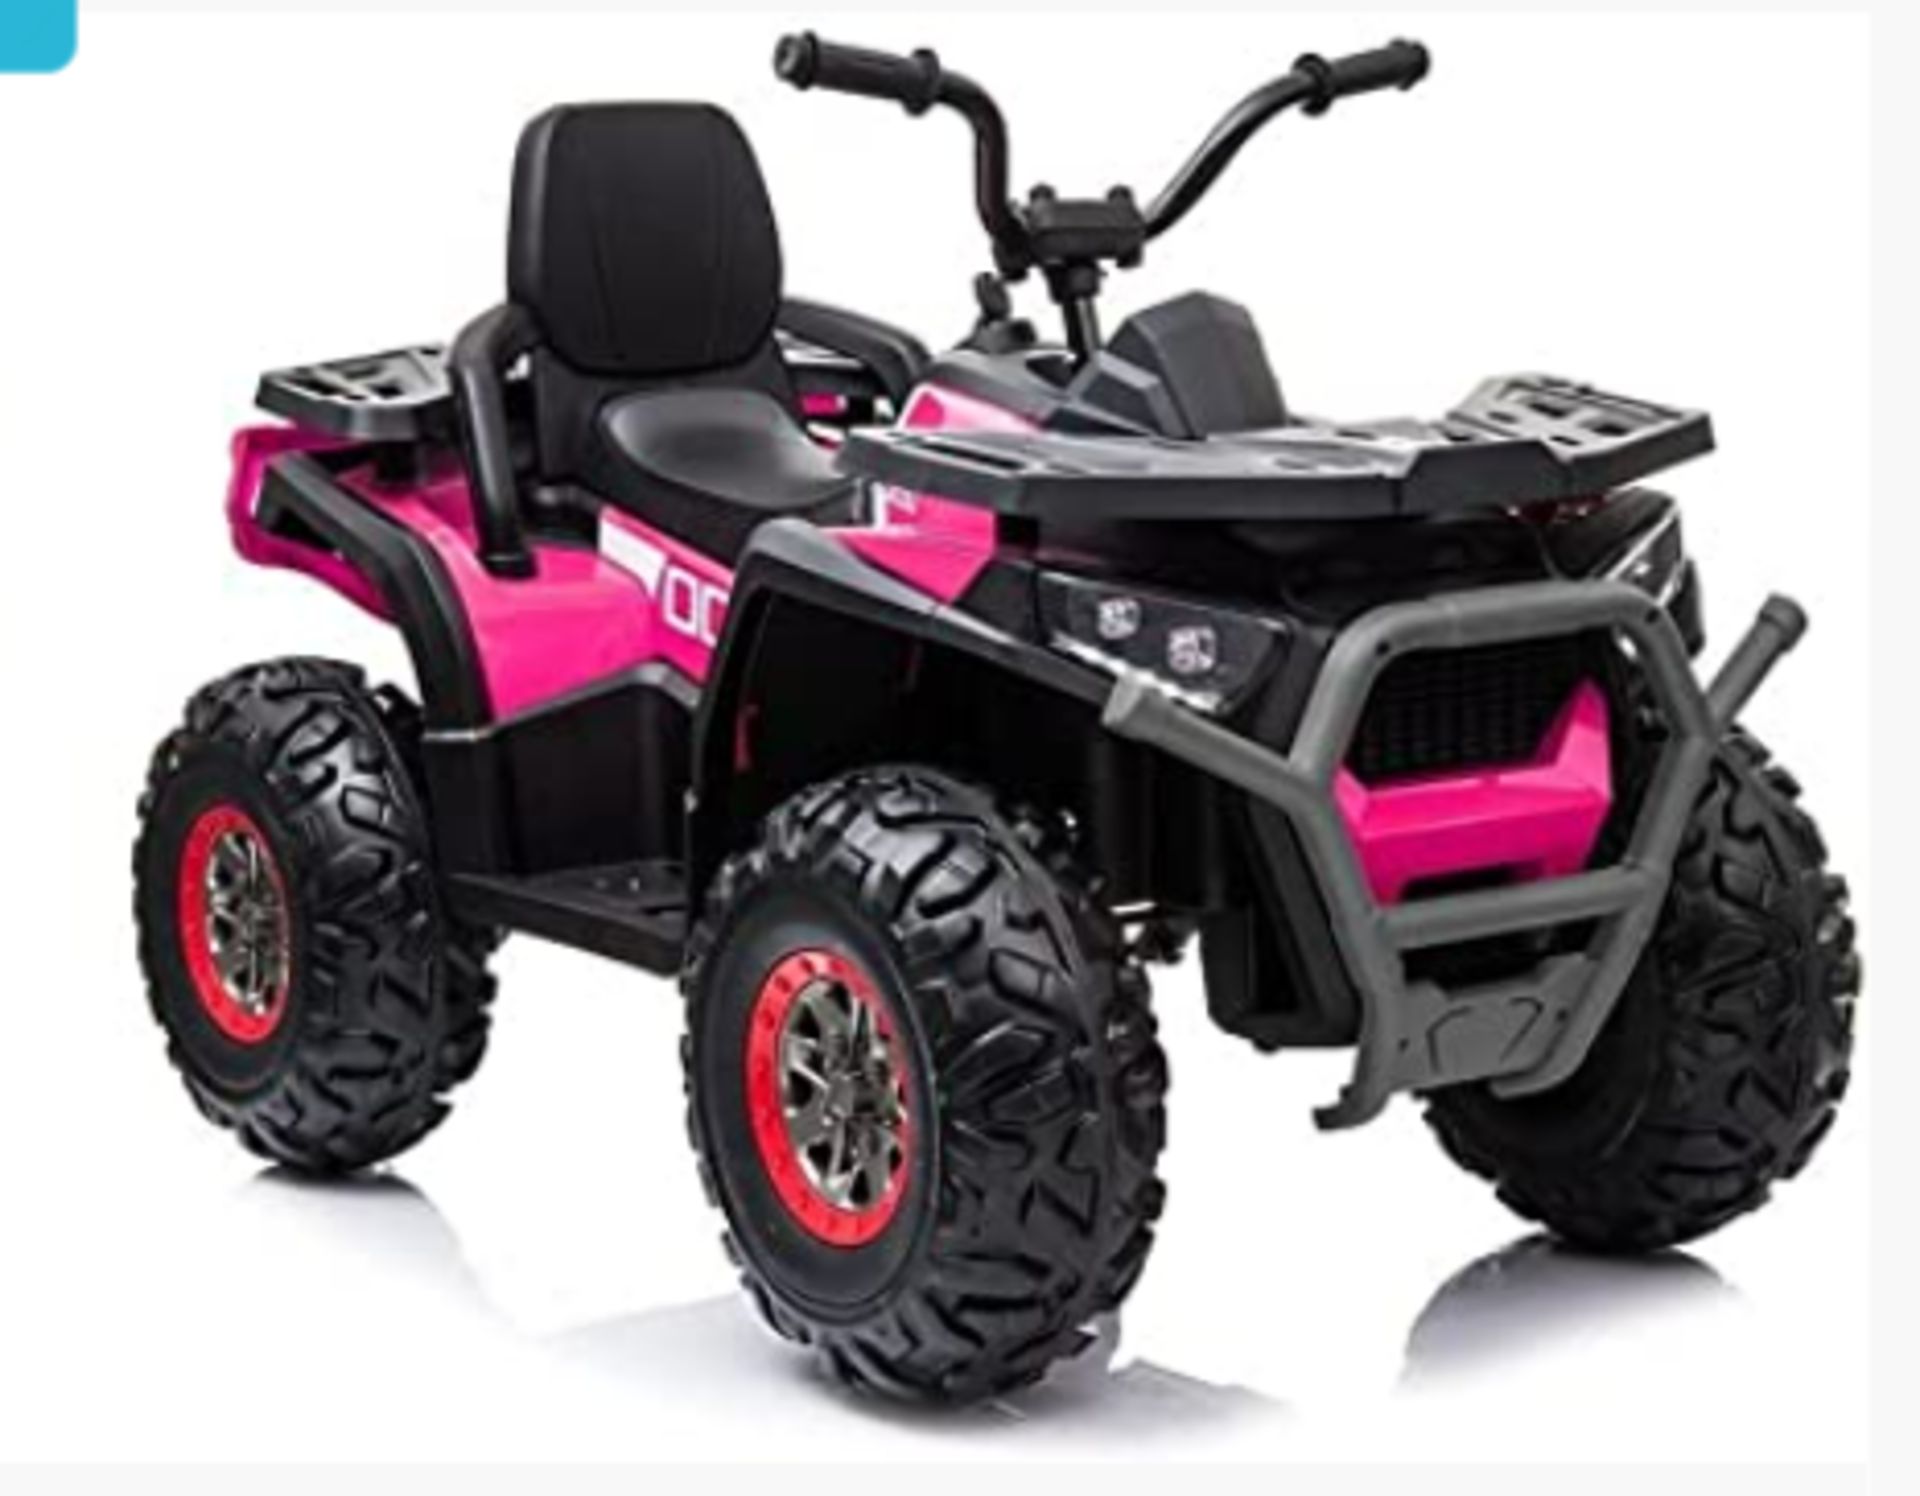 Brand New Ride On Childs Quad Bike 12v with Parental Remote Control - Pink